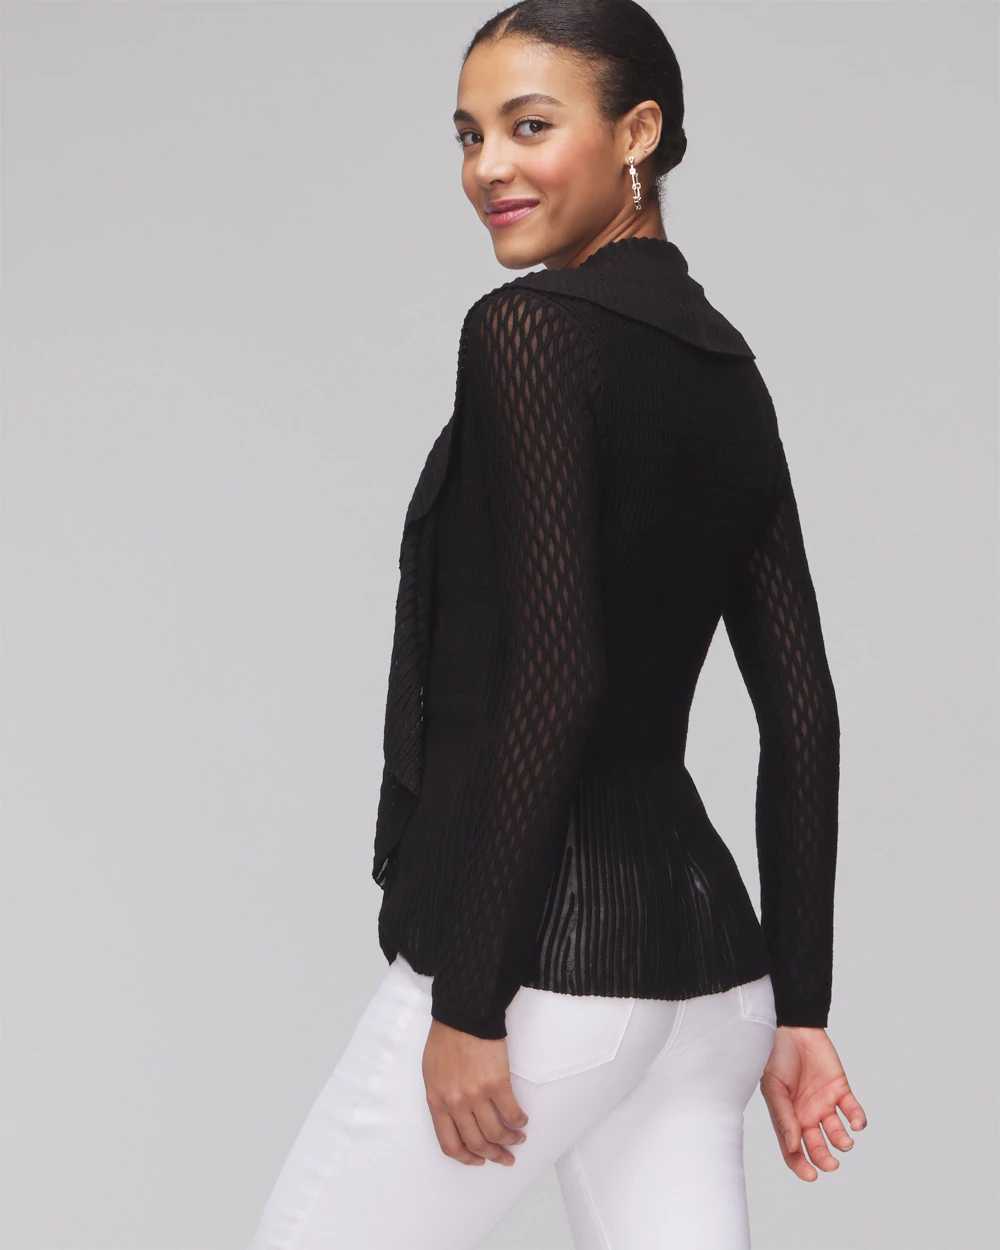 Long Sleeve Pointelle Peplum Cardigan click to view larger image.